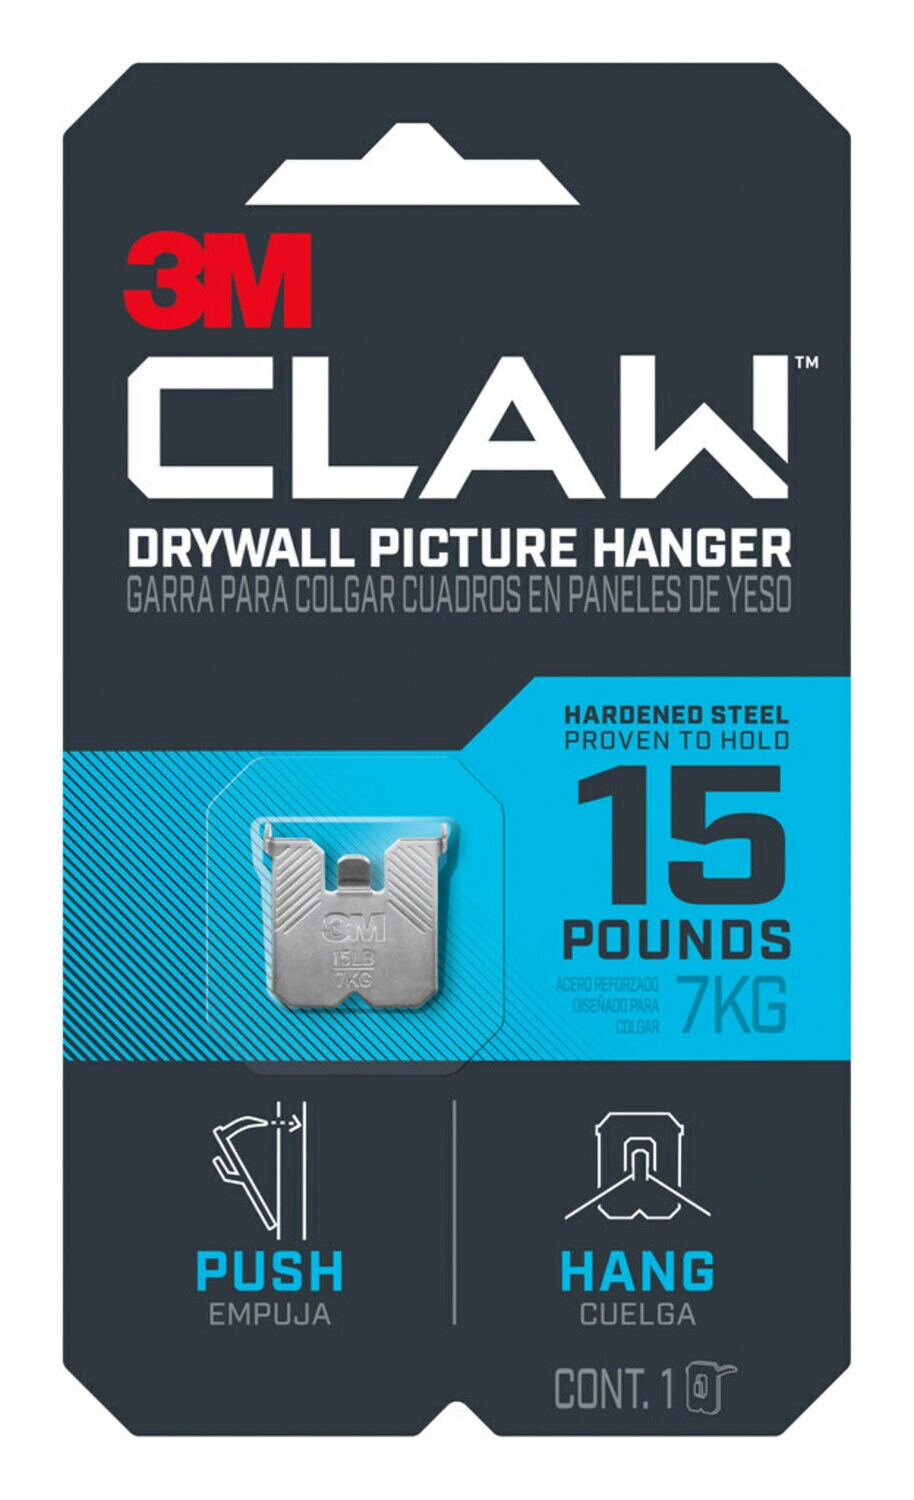 7100227275 - 3M CLAW Drywall Picture Hanger 15lb 3PH15-1EF, 1 Hanger